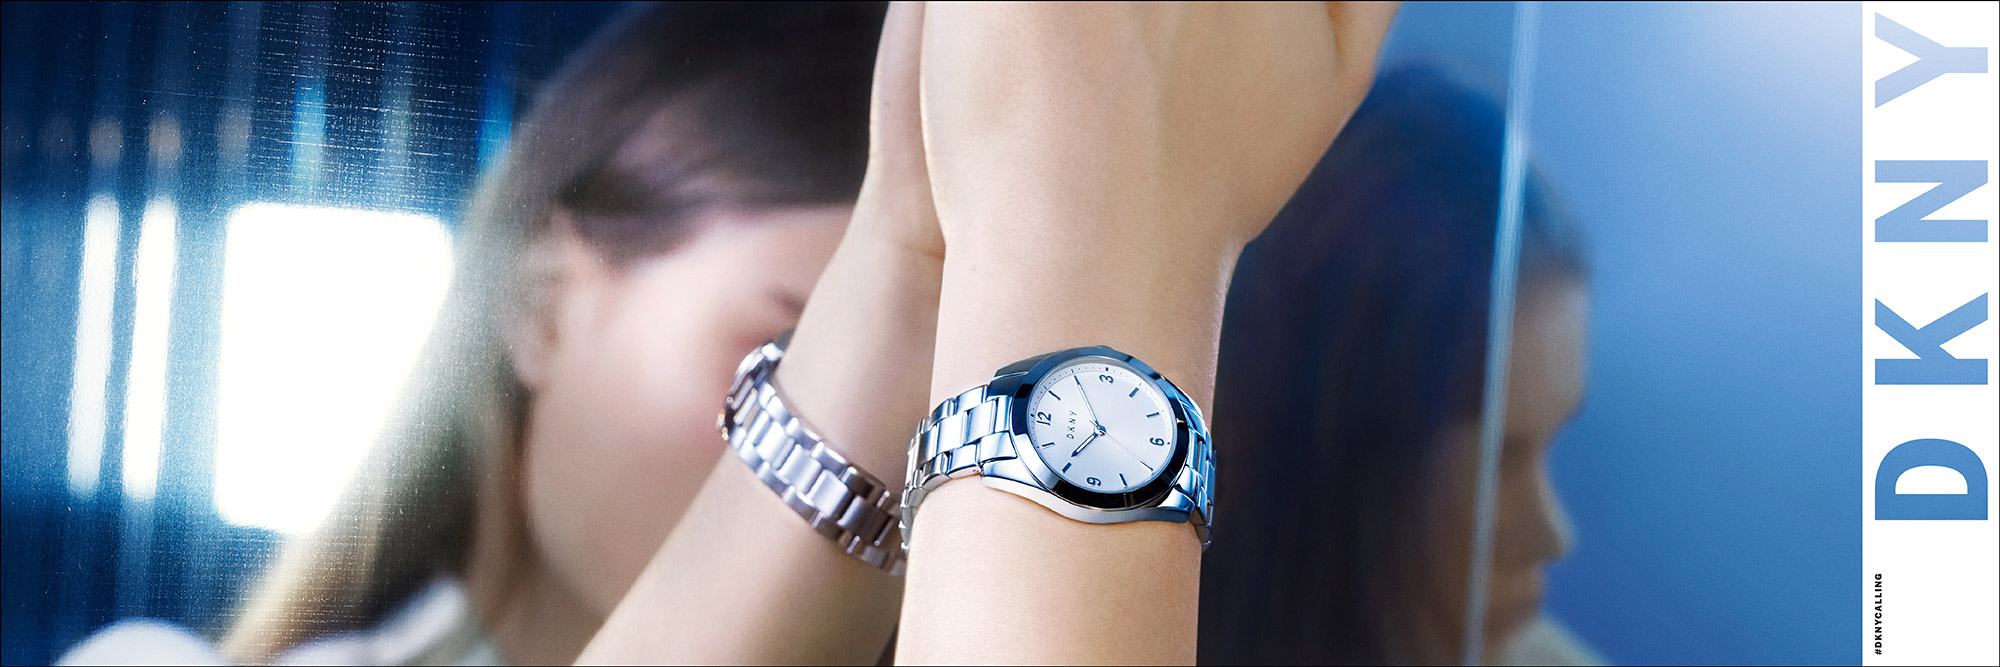 dkny women's watches